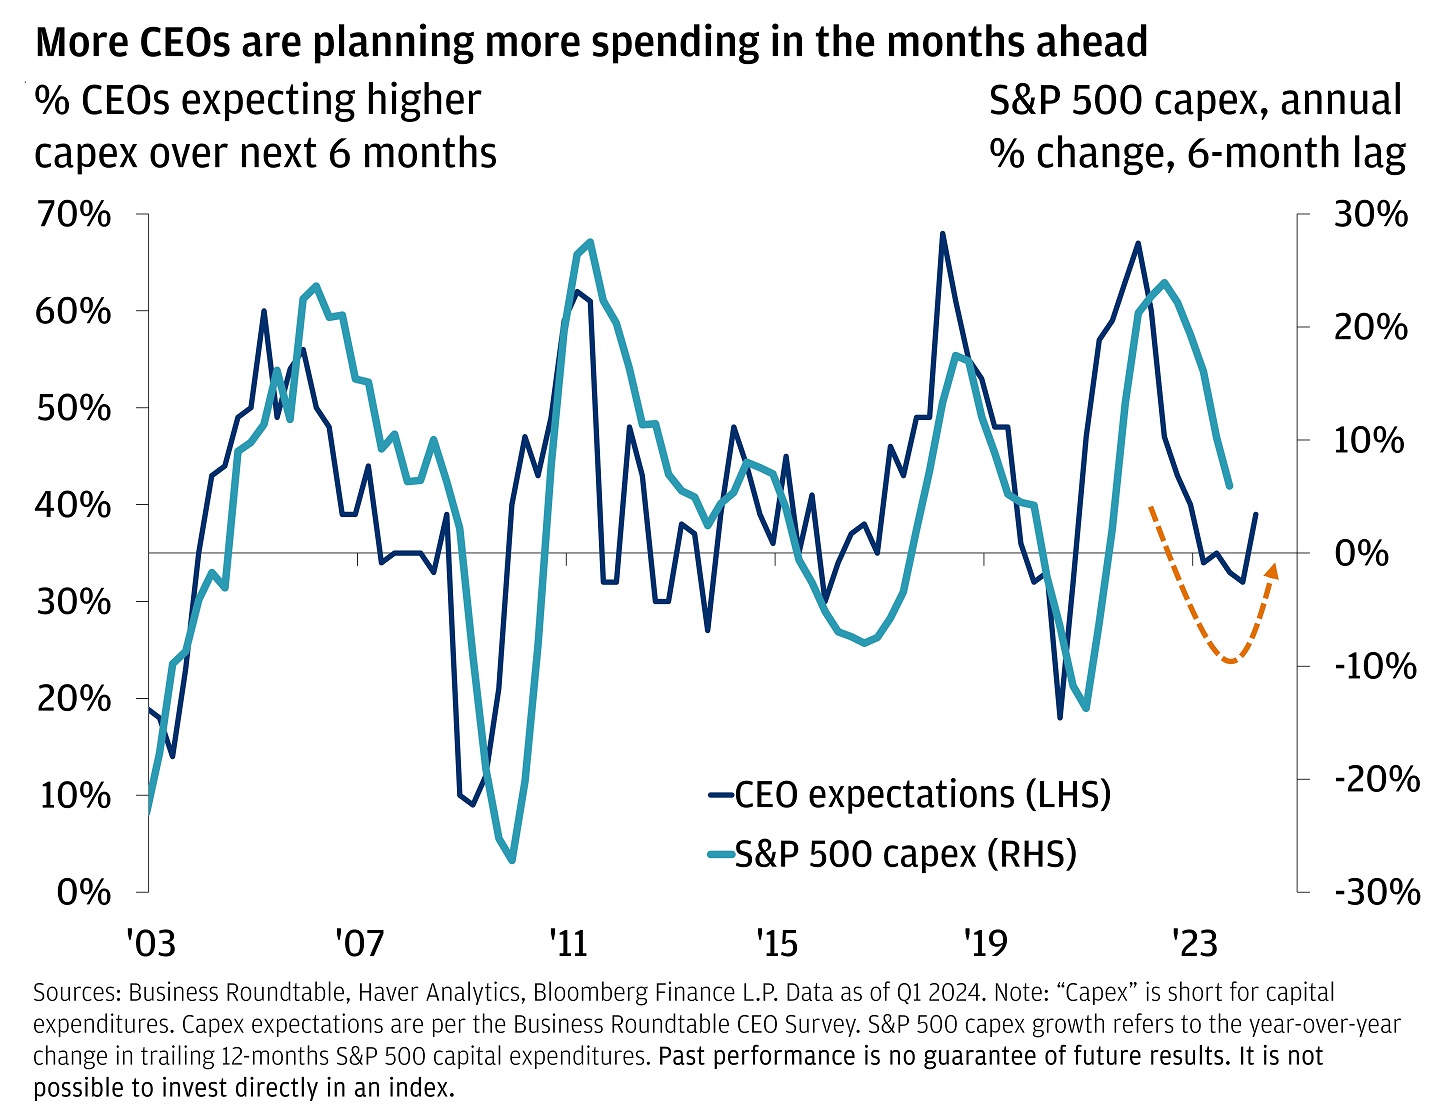 This chart shows the percent of U.S. CEOs expecting higher capex (capital expenditures) over the next 6 months and S&P 500 capex growth.